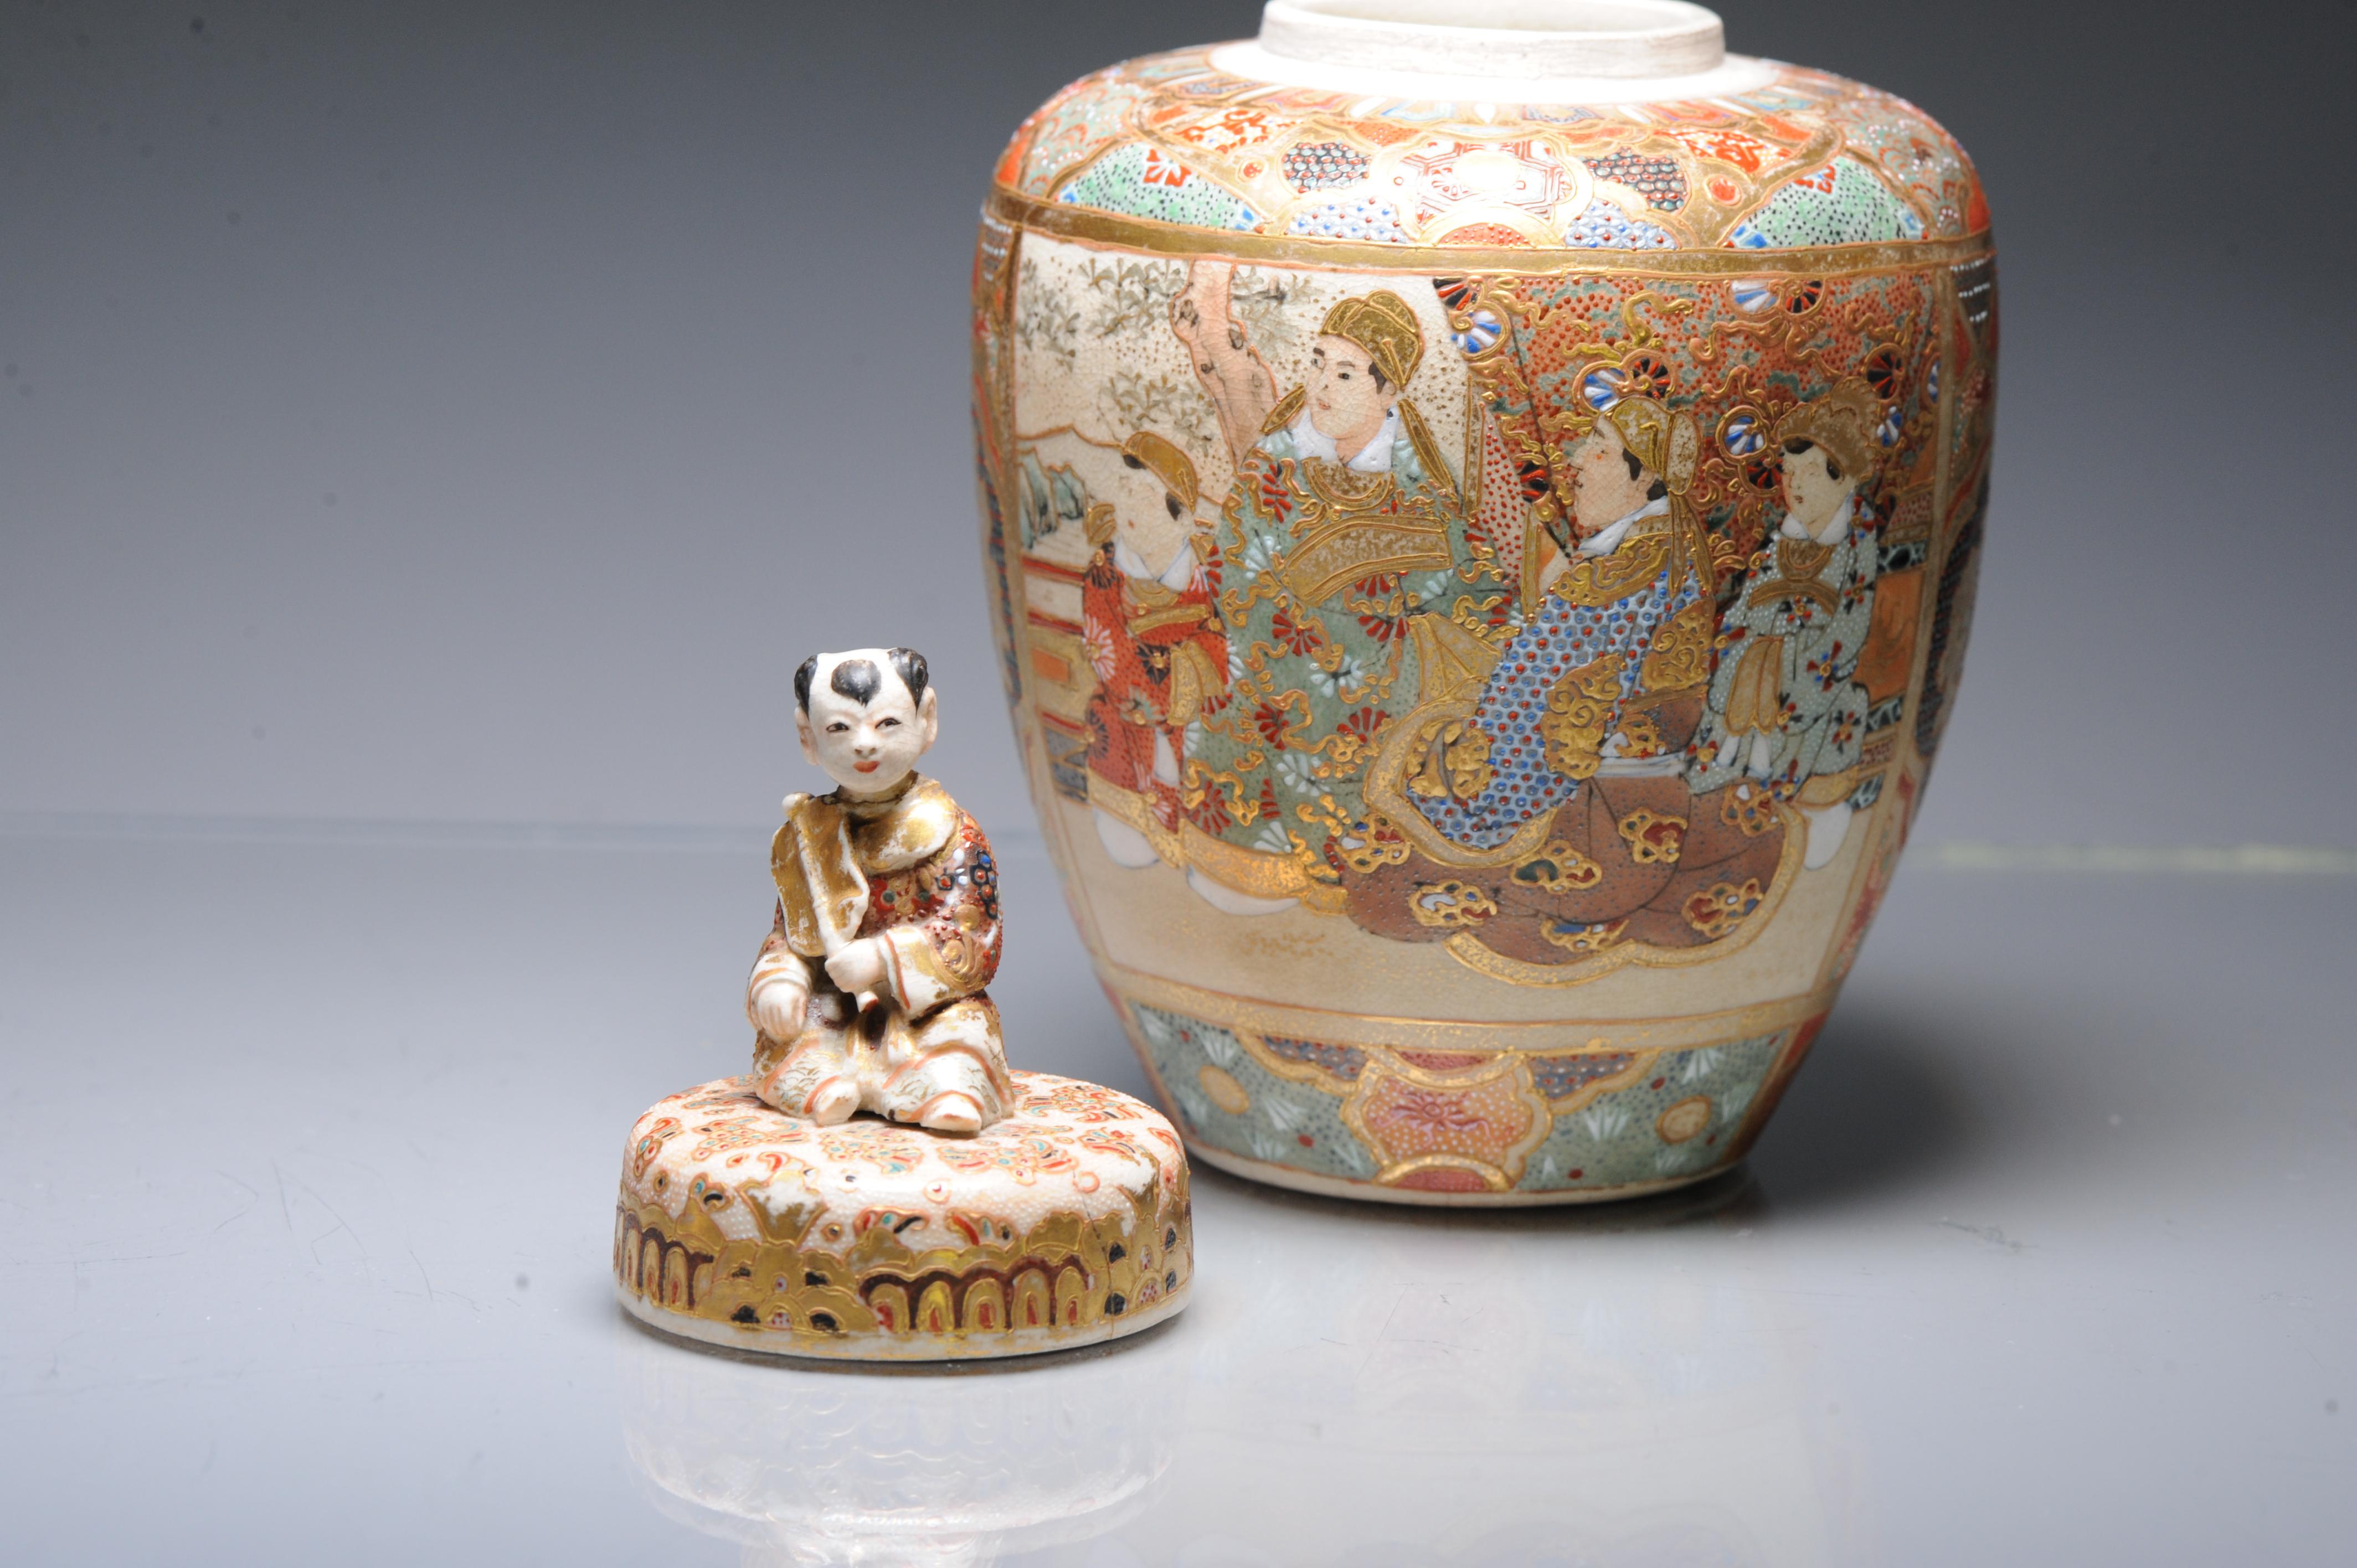 Antique Ca 1900 Japanese Satsuma Jar with Figures Richly Decorated Unmarked For Sale 3